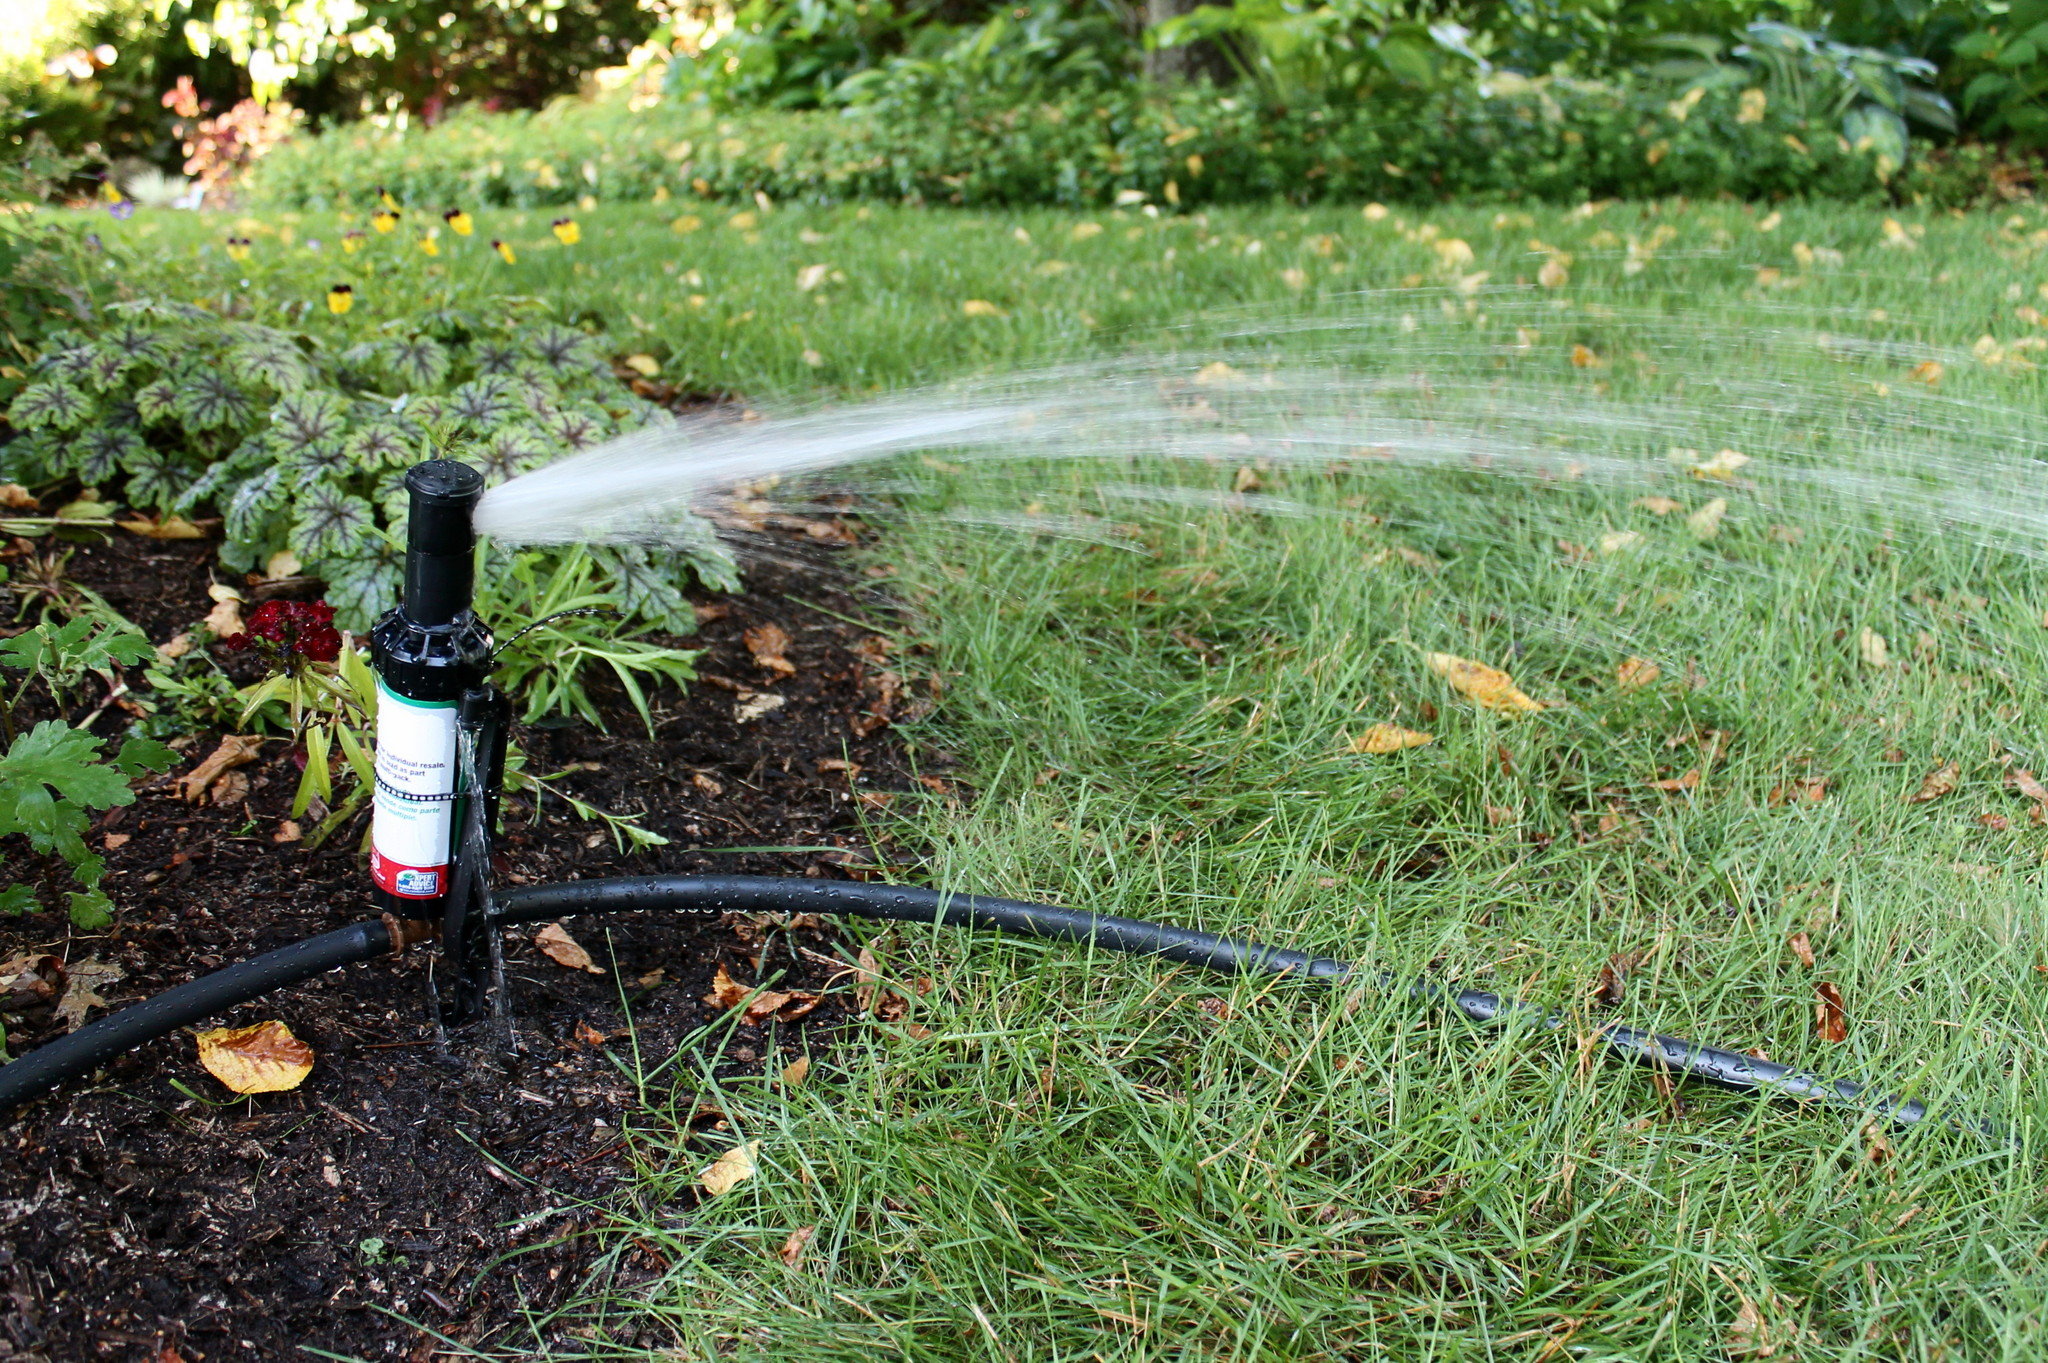 Test time in the garden: DIY sprinklers, a wireless plant sensor and ...